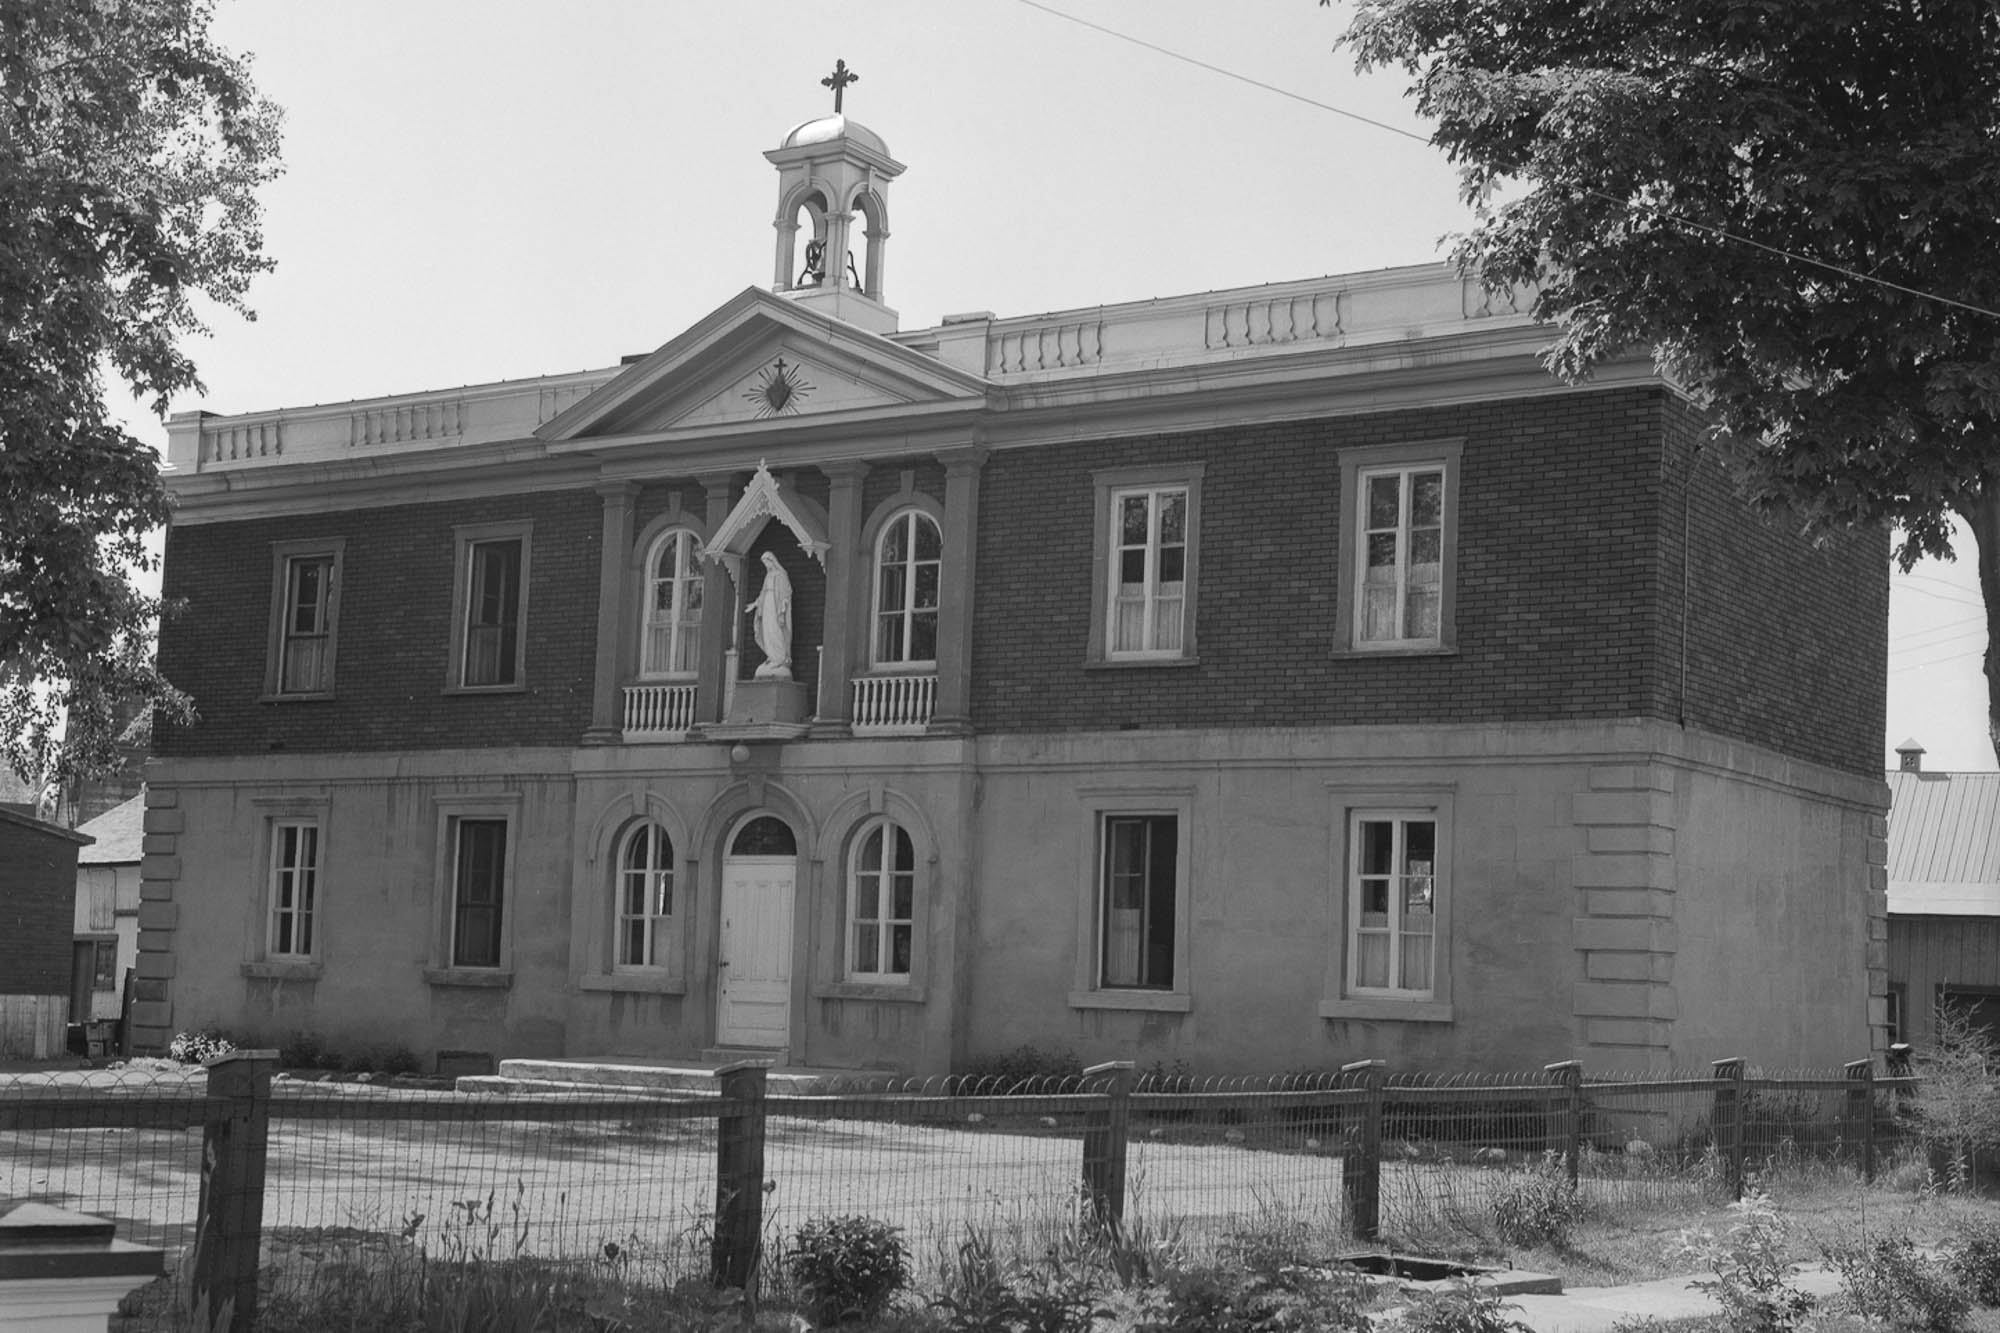 Archival black and white image of a stone and brick building with a neoclassical facade and a small bell tower.